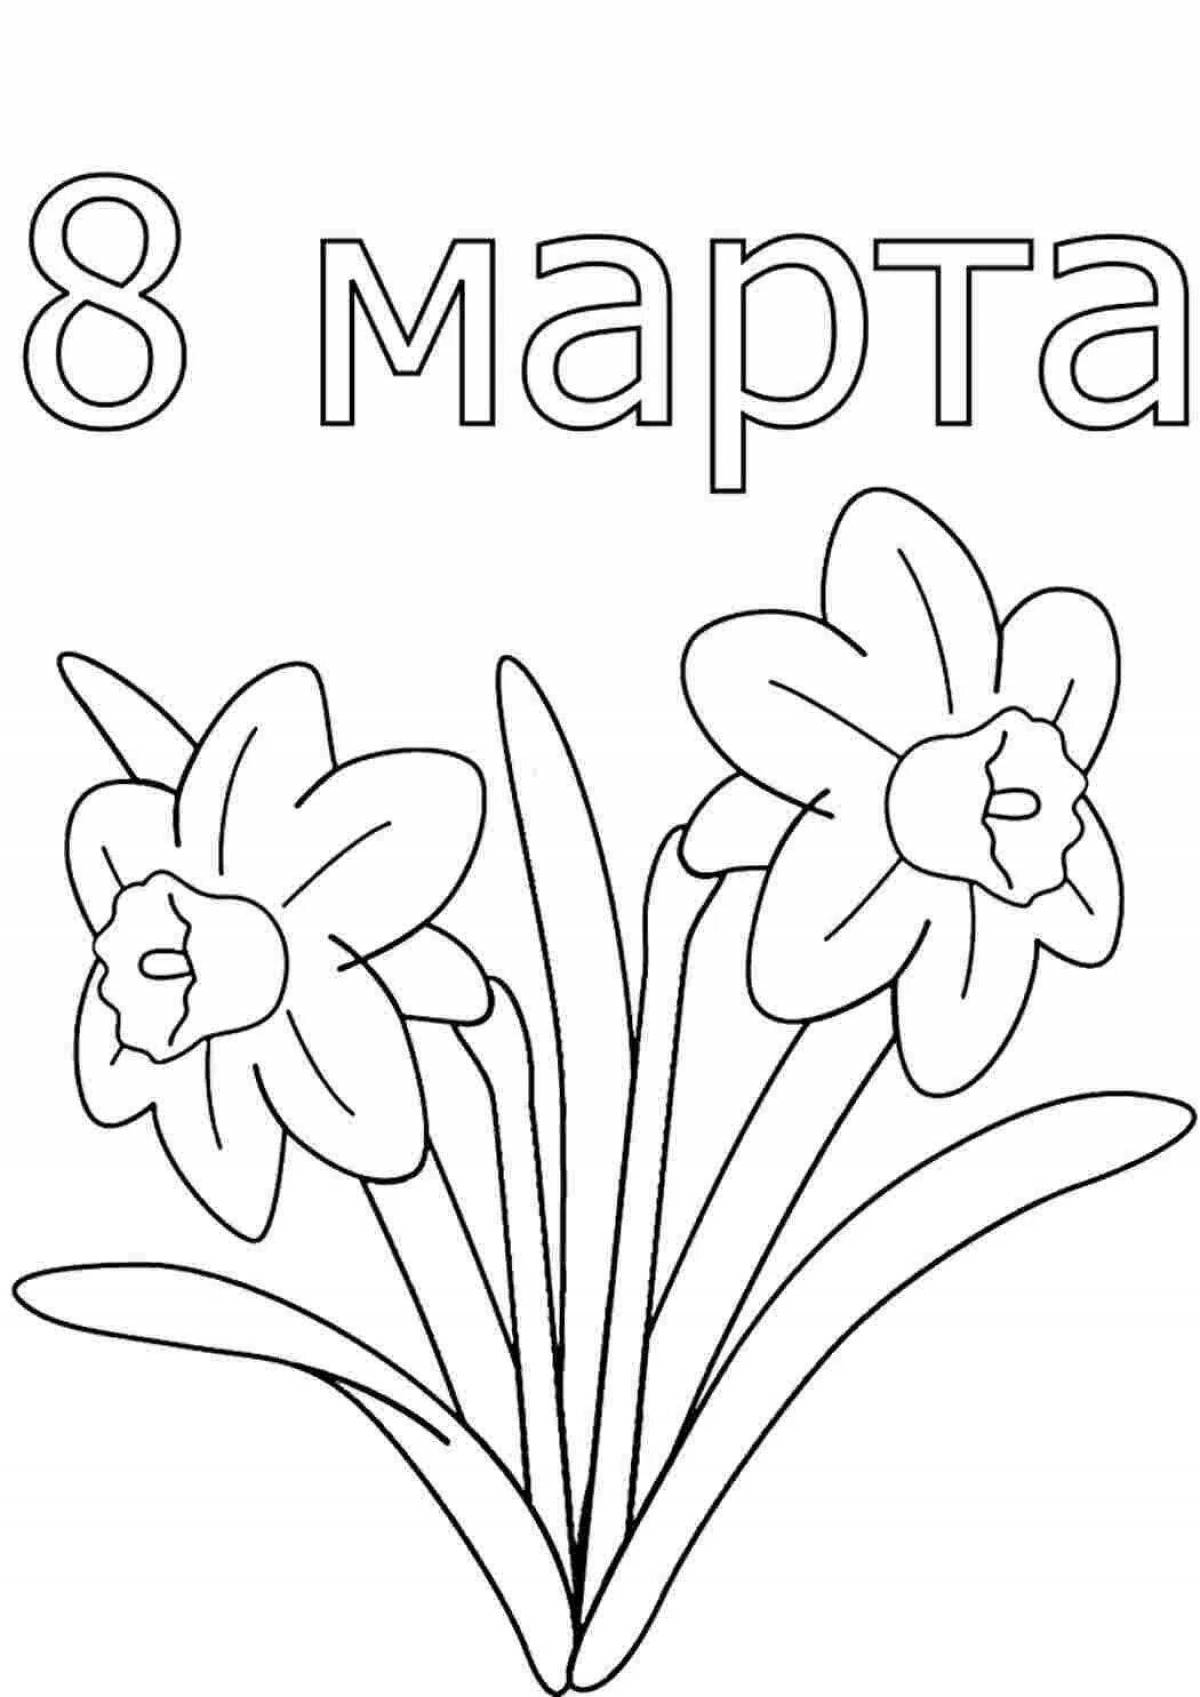 Exciting March 8 coloring book for kids